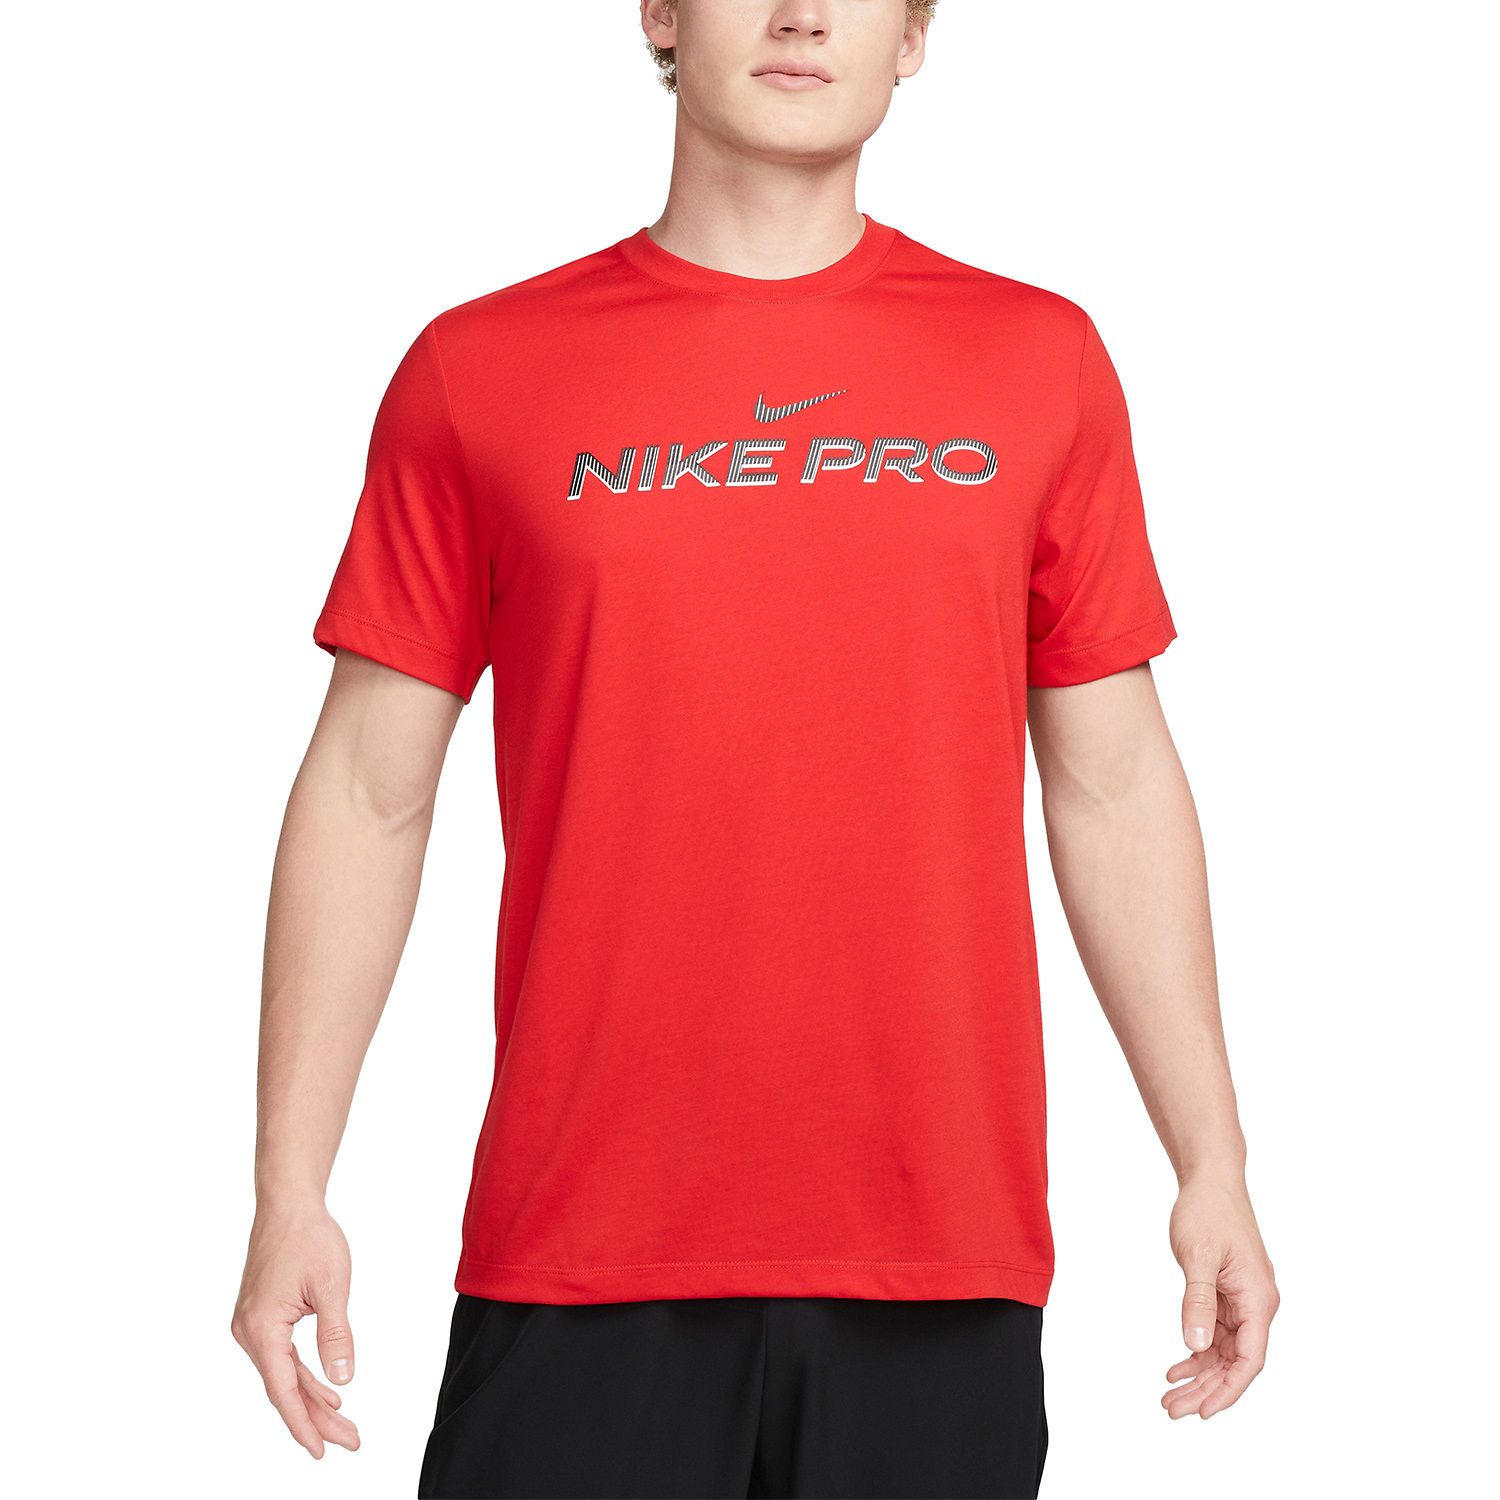 Mens Nike Pro Collection.